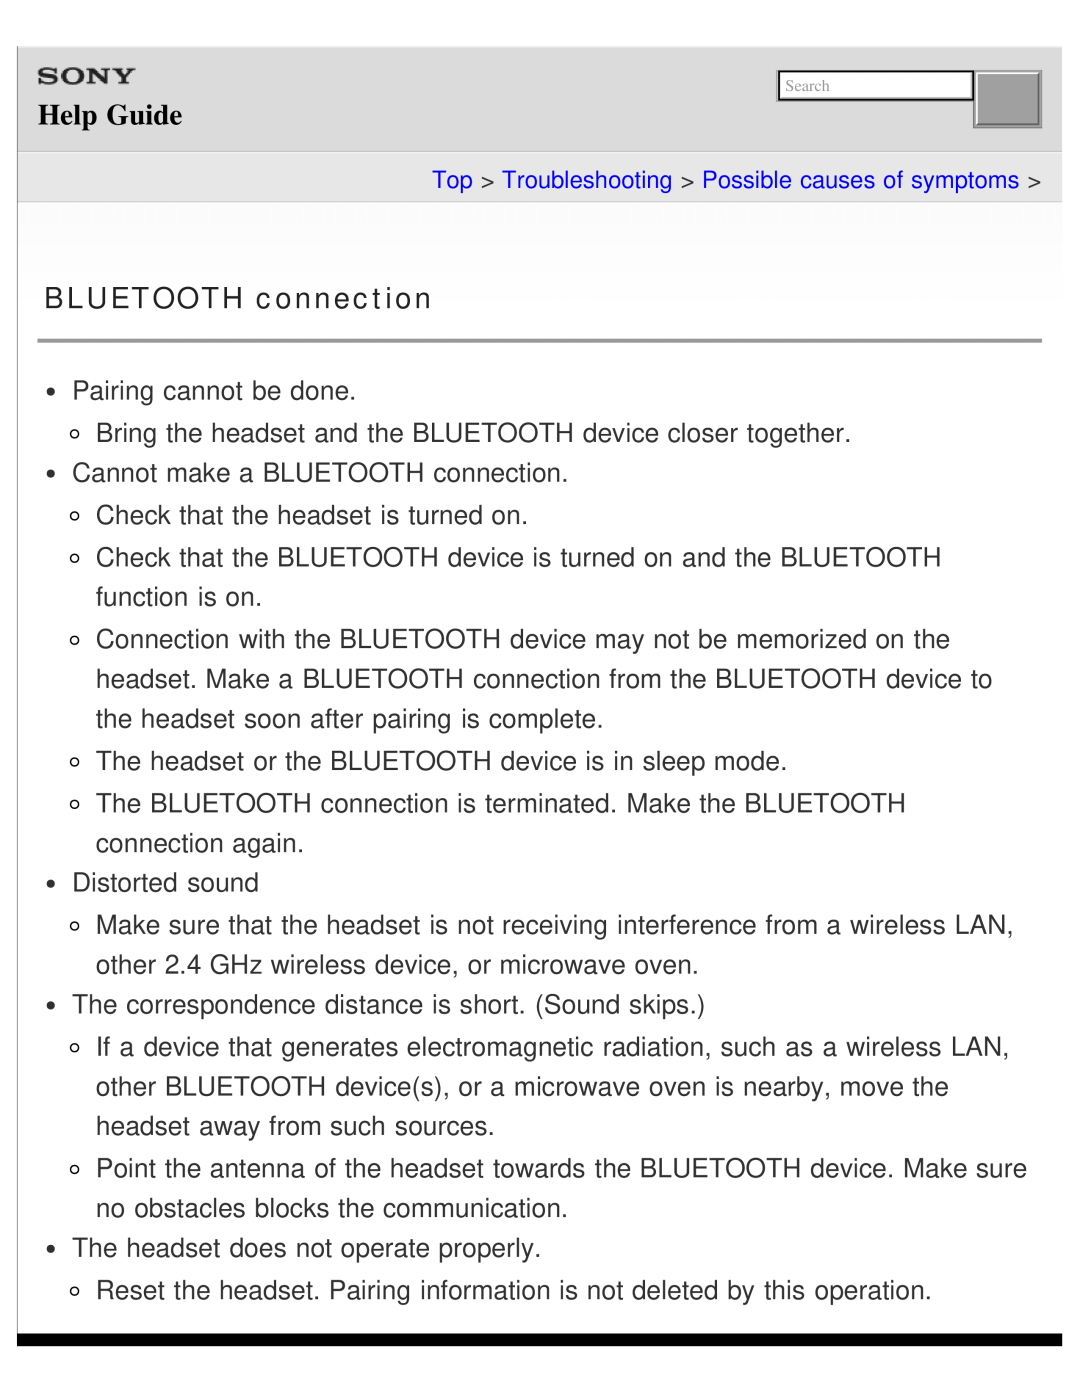 Sony DR-BTN200 manual Help Guide, BLUETOOTH connection, Pairing cannot be done 